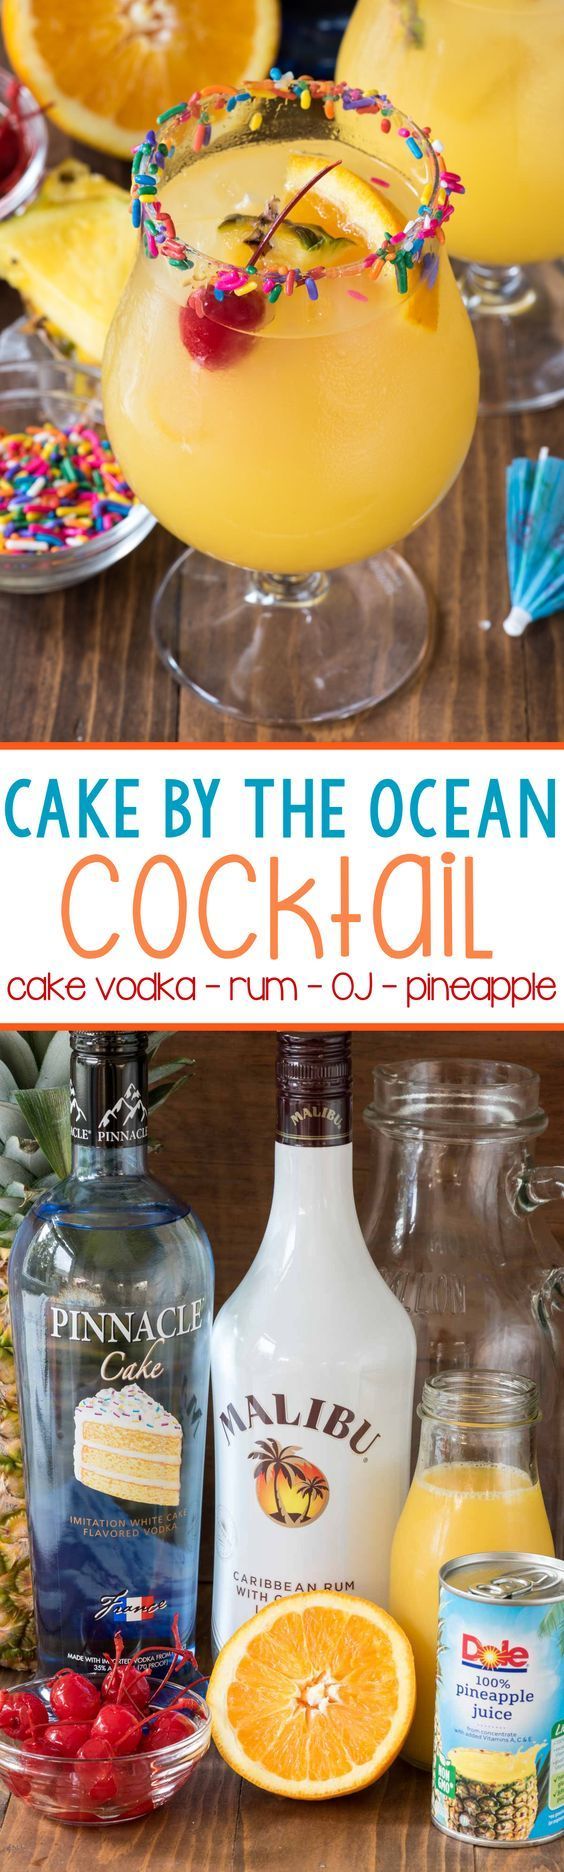 Cake by the Ocean Cocktail made with Cake Vodka, Coconut Rum, Orange and Pineapple Juices! You can whip up a pitcher of these in